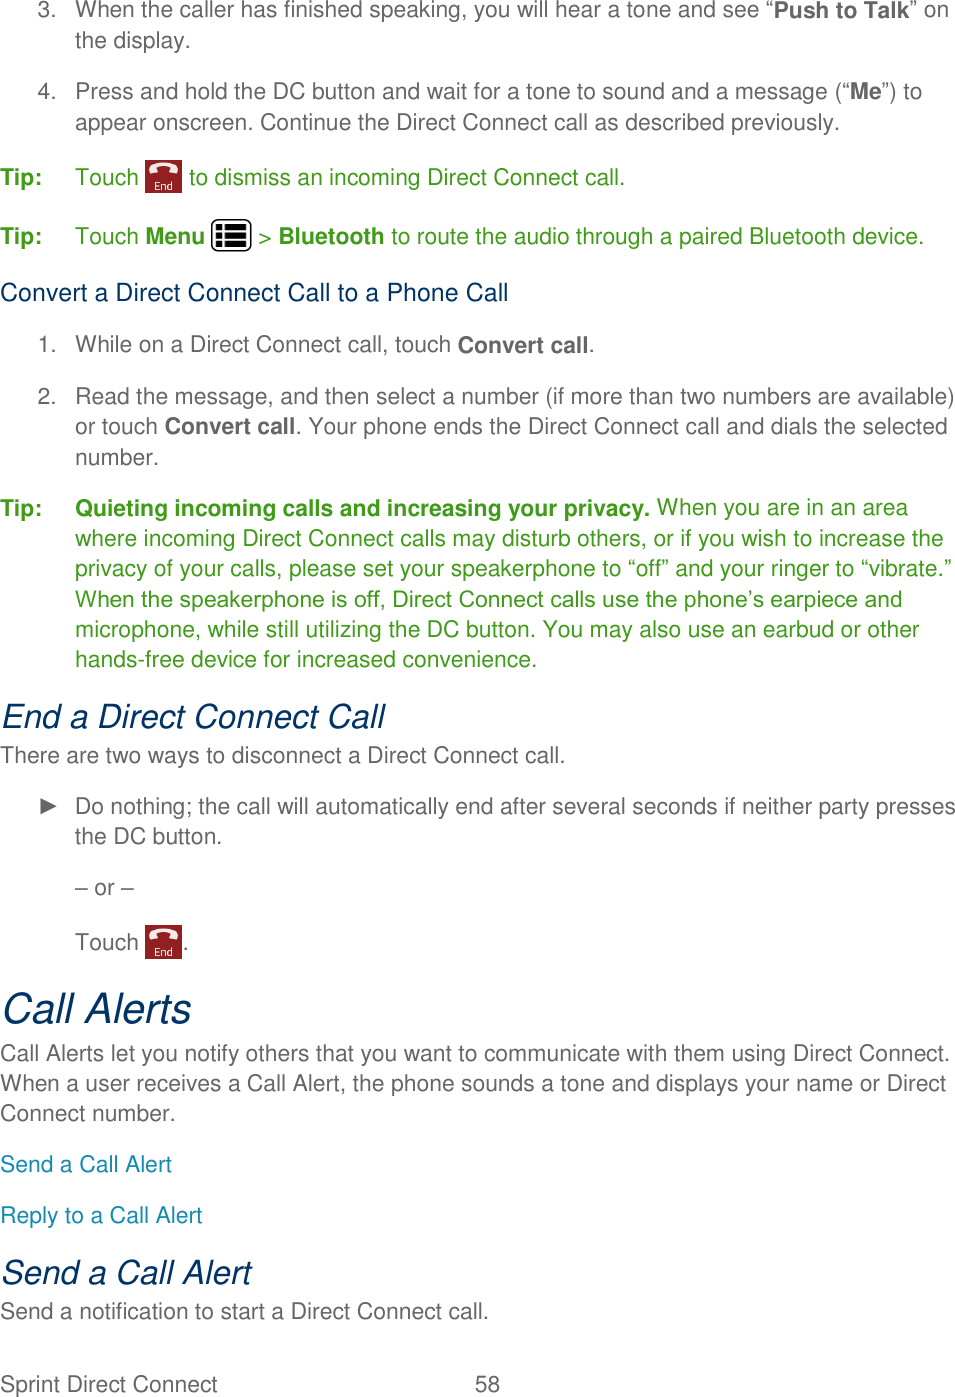 Sprint Direct Connect  58   3.  When the caller has finished speaking, you will hear a tone and see “Push to Talk” on the display. 4.  Press and hold the DC button and wait for a tone to sound and a message (“Me”) to appear onscreen. Continue the Direct Connect call as described previously. Tip:  Touch   to dismiss an incoming Direct Connect call. Tip:  Touch Menu   &gt; Bluetooth to route the audio through a paired Bluetooth device. Convert a Direct Connect Call to a Phone Call 1.  While on a Direct Connect call, touch Convert call. 2.  Read the message, and then select a number (if more than two numbers are available) or touch Convert call. Your phone ends the Direct Connect call and dials the selected number. Tip: Quieting incoming calls and increasing your privacy. When you are in an area where incoming Direct Connect calls may disturb others, or if you wish to increase the privacy of your calls, please set your speakerphone to “off” and your ringer to “vibrate.” When the speakerphone is off, Direct Connect calls use the phone’s earpiece and microphone, while still utilizing the DC button. You may also use an earbud or other hands-free device for increased convenience. End a Direct Connect Call There are two ways to disconnect a Direct Connect call. ►  Do nothing; the call will automatically end after several seconds if neither party presses the DC button. – or – Touch  . Call Alerts Call Alerts let you notify others that you want to communicate with them using Direct Connect. When a user receives a Call Alert, the phone sounds a tone and displays your name or Direct Connect number. Send a Call Alert Reply to a Call Alert Send a Call Alert Send a notification to start a Direct Connect call. 